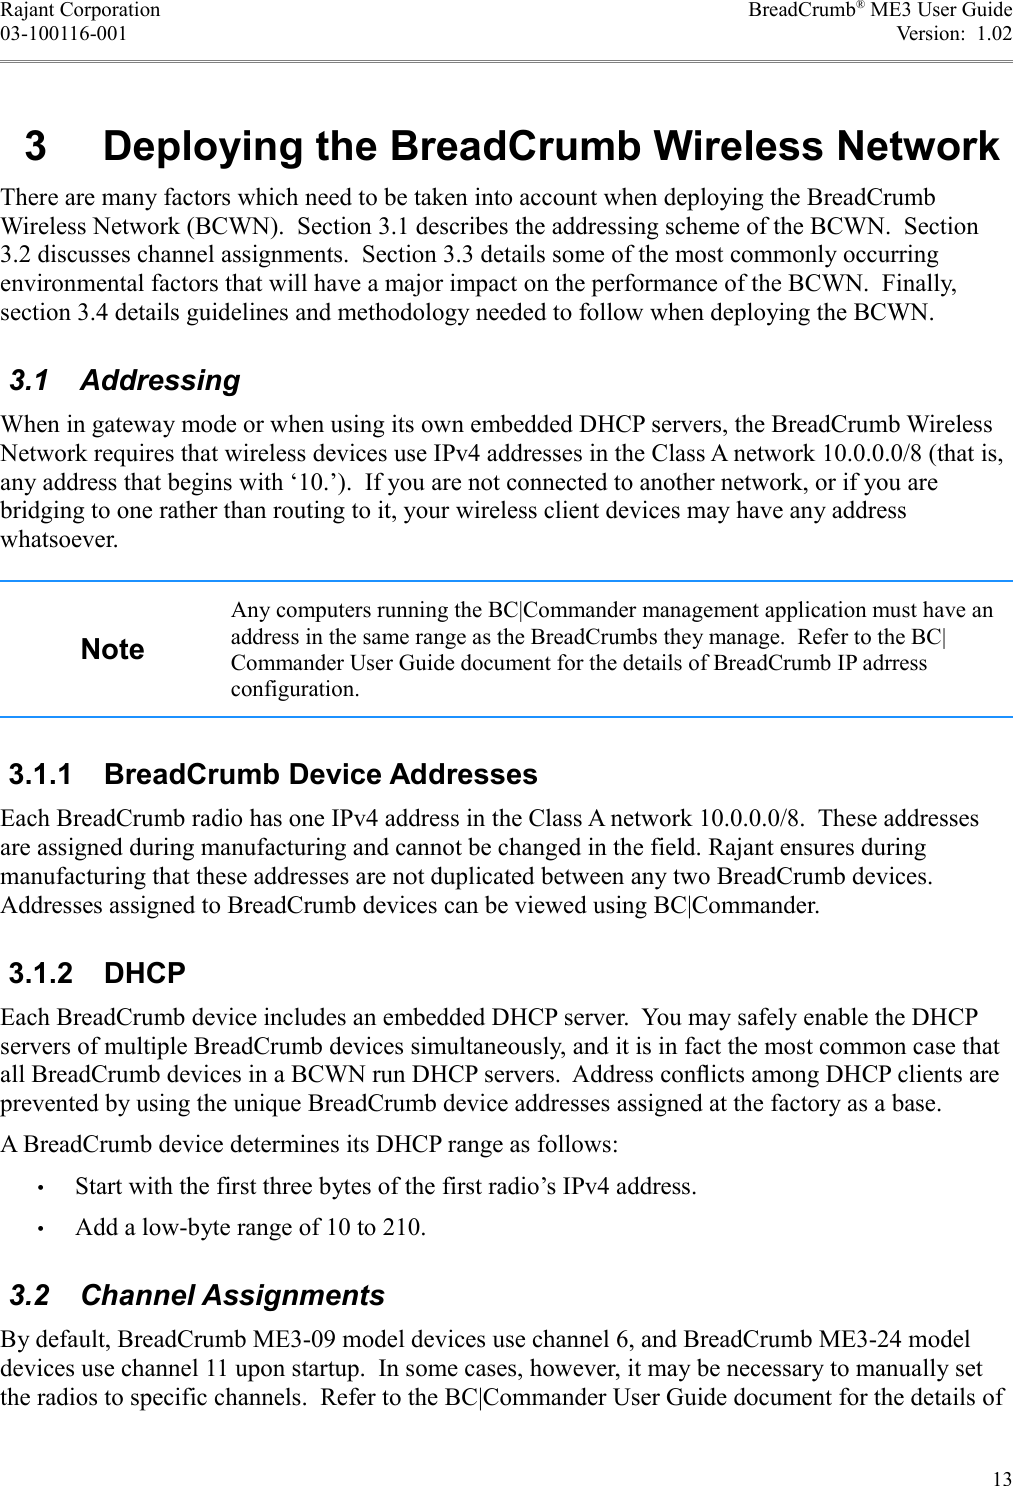 Rajant Corporation BreadCrumb® ME3 User Guide03-100116-001 Version:  1.02 3  Deploying the BreadCrumb Wireless NetworkThere are many factors which need to be taken into account when deploying the BreadCrumb Wireless Network (BCWN).  Section 3.1 describes the addressing scheme of the BCWN.  Section 3.2 discusses channel assignments.  Section 3.3 details some of the most commonly occurring environmental factors that will have a major impact on the performance of the BCWN.  Finally, section 3.4 details guidelines and methodology needed to follow when deploying the BCWN. 3.1  AddressingWhen in gateway mode or when using its own embedded DHCP servers, the BreadCrumb Wireless Network requires that wireless devices use IPv4 addresses in the Class A network 10.0.0.0/8 (that is, any address that begins with ‘10.’).  If you are not connected to another network, or if you are bridging to one rather than routing to it, your wireless client devices may have any address whatsoever.NoteAny computers running the BC|Commander management application must have an address in the same range as the BreadCrumbs they manage.  Refer to the BC|Commander User Guide document for the details of BreadCrumb IP adrress configuration. 3.1.1  BreadCrumb Device AddressesEach BreadCrumb radio has one IPv4 address in the Class A network 10.0.0.0/8.  These addresses are assigned during manufacturing and cannot be changed in the field. Rajant ensures during manufacturing that these addresses are not duplicated between any two BreadCrumb devices. Addresses assigned to BreadCrumb devices can be viewed using BC|Commander. 3.1.2  DHCPEach BreadCrumb device includes an embedded DHCP server.  You may safely enable the DHCP servers of multiple BreadCrumb devices simultaneously, and it is in fact the most common case that all BreadCrumb devices in a BCWN run DHCP servers.  Address conﬂicts among DHCP clients are prevented by using the unique BreadCrumb device addresses assigned at the factory as a base.A BreadCrumb device determines its DHCP range as follows:•Start with the first three bytes of the first radio’s IPv4 address.•Add a low-byte range of 10 to 210. 3.2  Channel AssignmentsBy default, BreadCrumb ME3-09 model devices use channel 6, and BreadCrumb ME3-24 model devices use channel 11 upon startup.  In some cases, however, it may be necessary to manually set the radios to specific channels.  Refer to the BC|Commander User Guide document for the details of 13